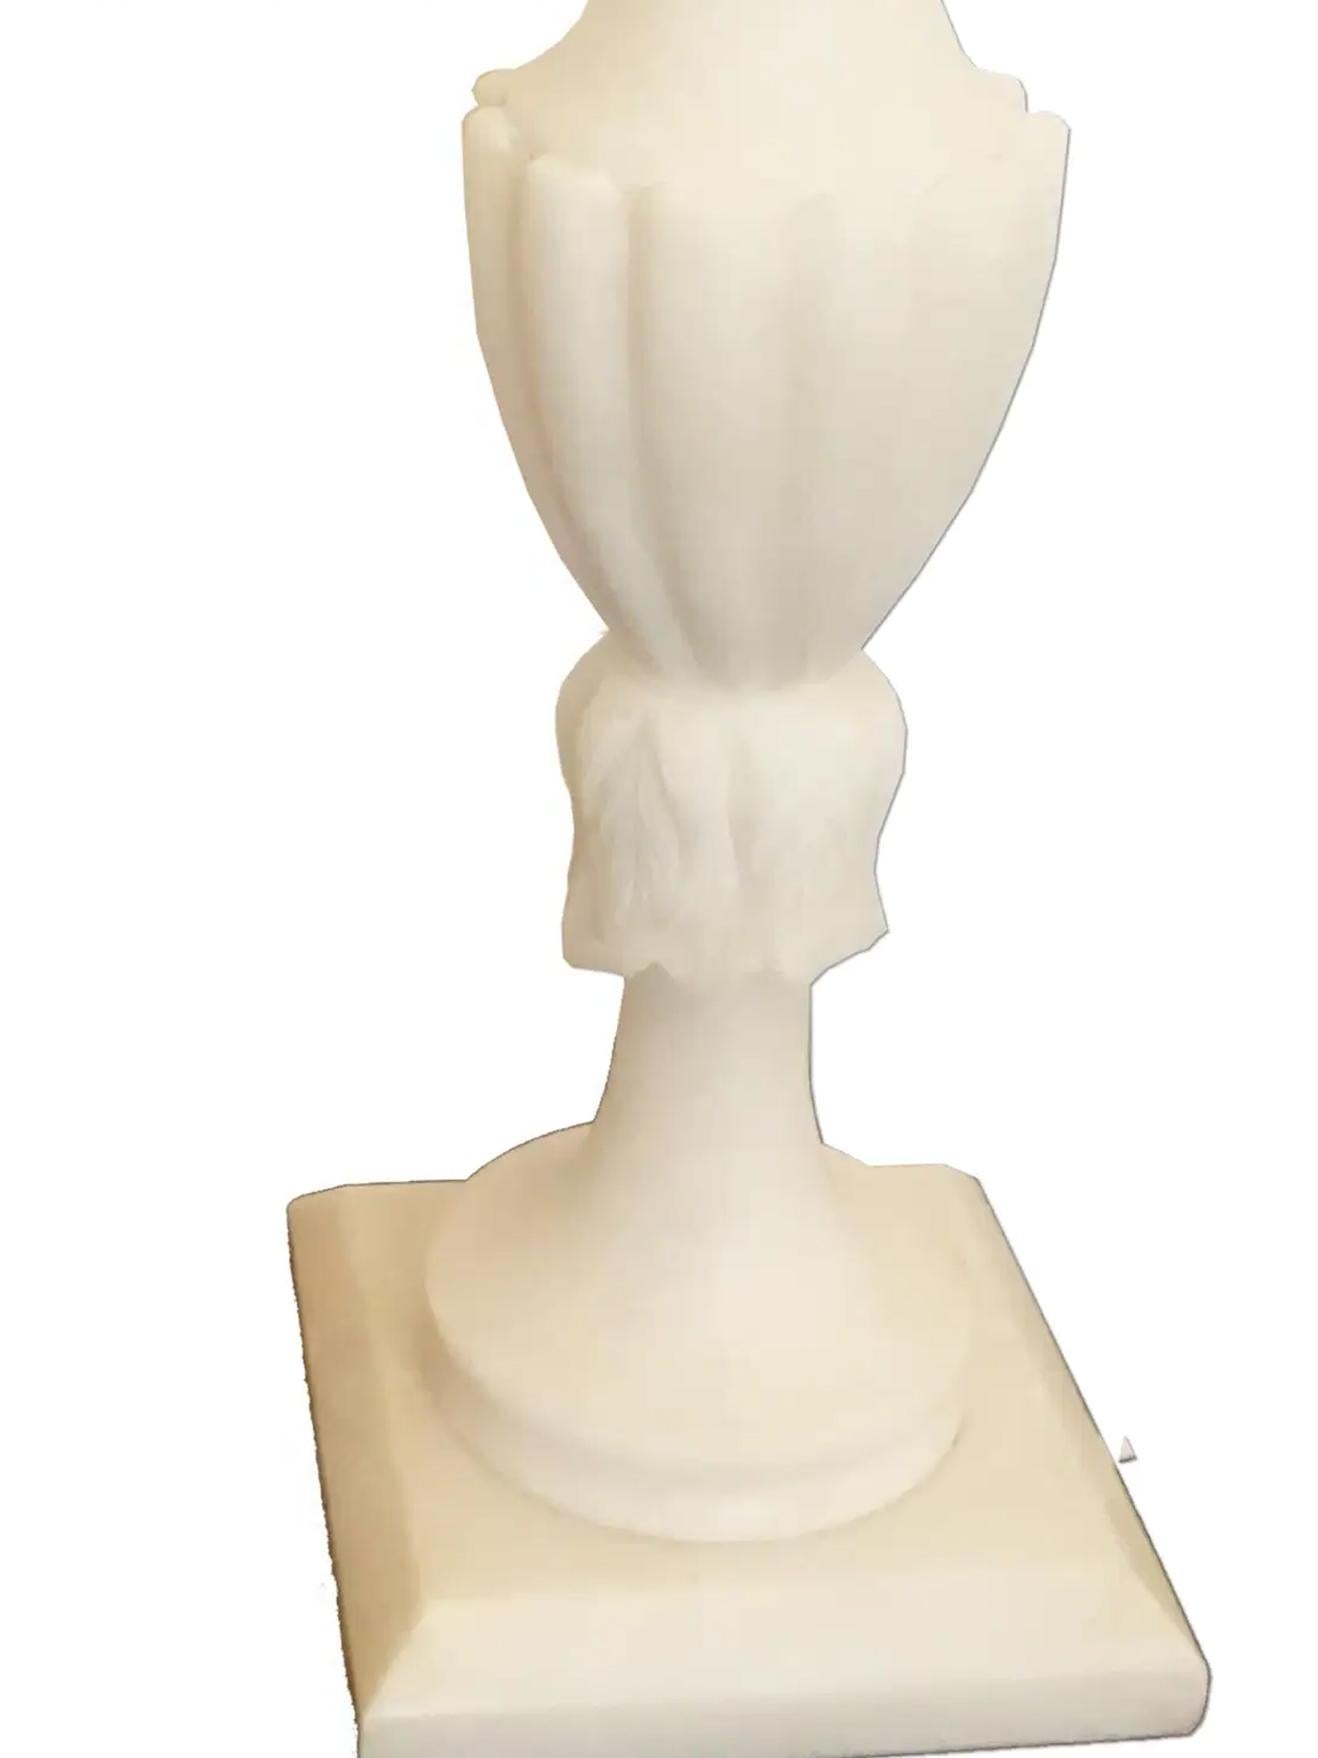 Precious lamps of alabaster or staturium marble, it is difficult to distinguish
They are tall, stylized and elegant lamps.
 They are very well made and are in perfect condition.
Due to their size, these lamps are perfect to put on top of a